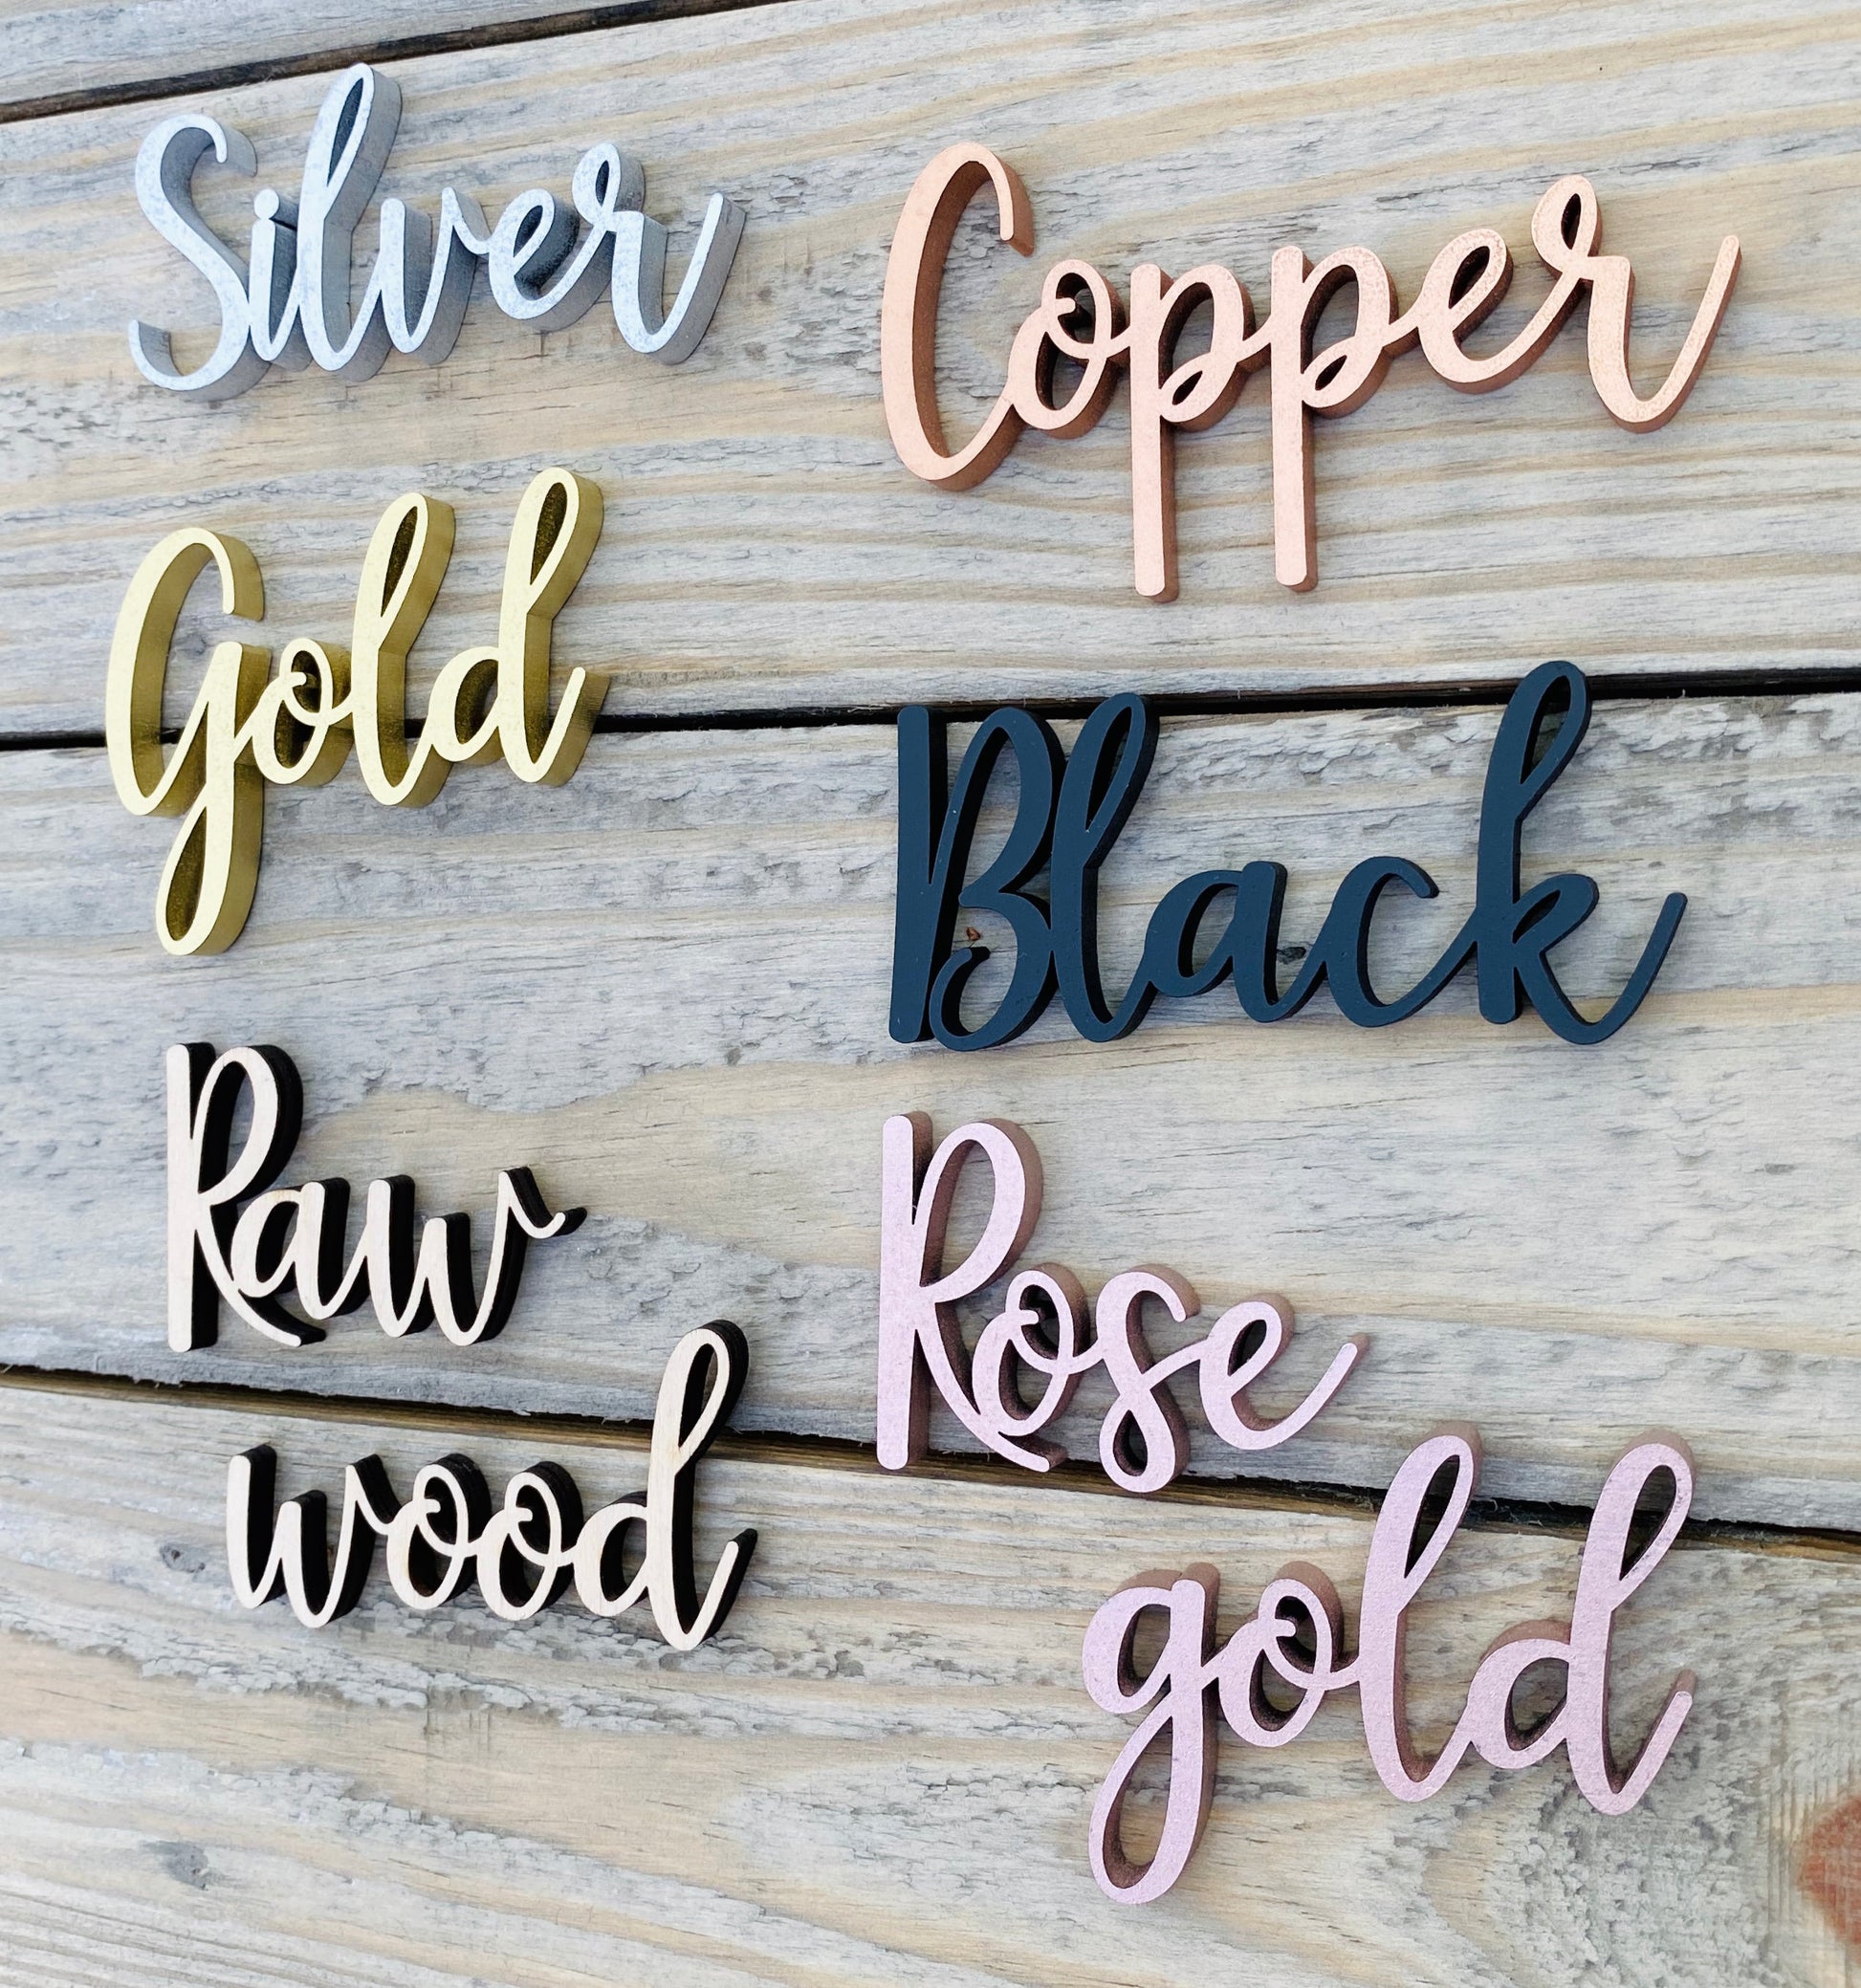 Engagement Couple Name Sign, 3D Last Name Est Sign, Engagement Party Backdrop, Family Name Sign Wedding Gift, Large Wedding Sign Decor